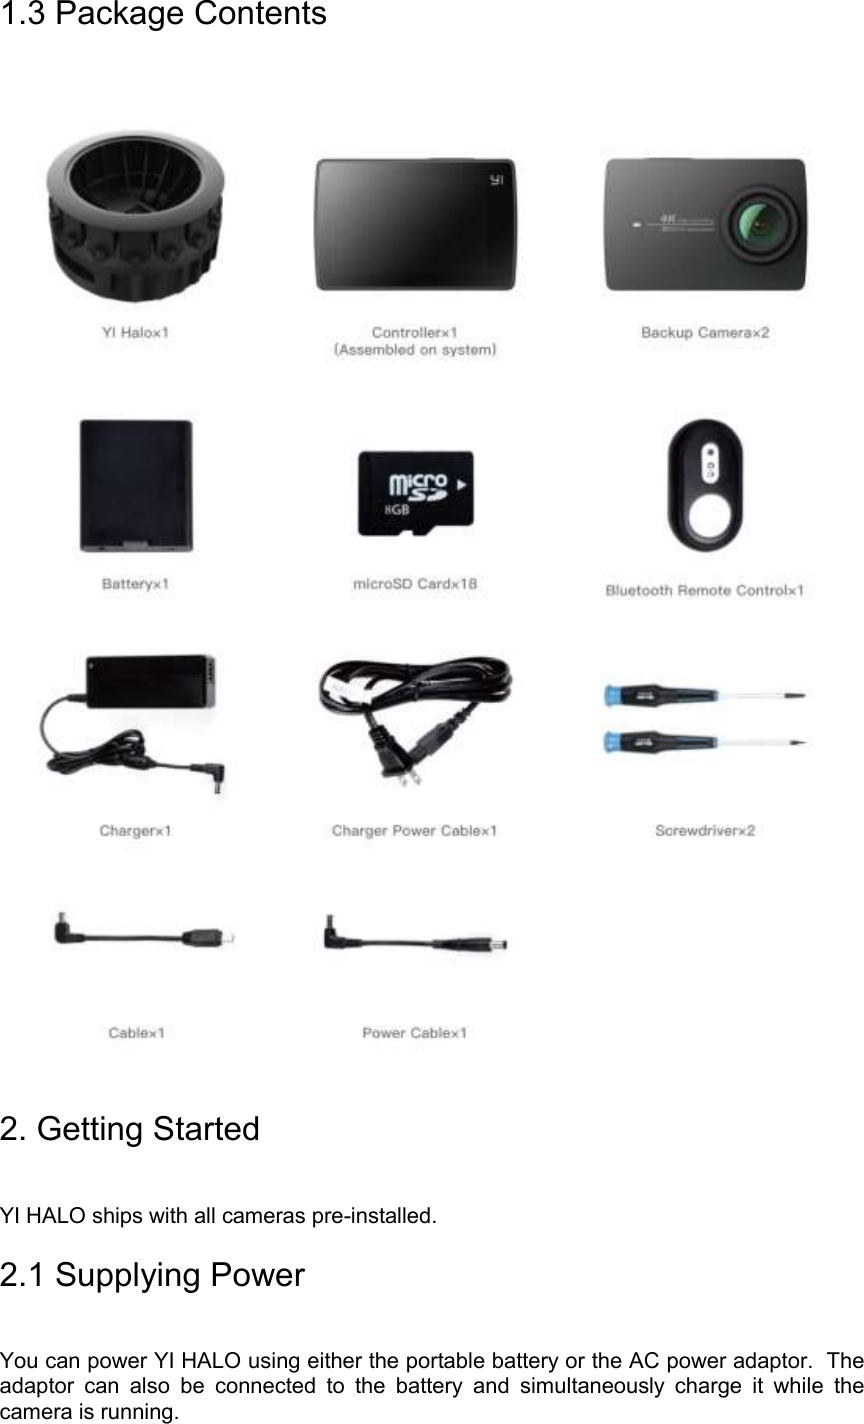 1.3 Package Contents  2. Getting Started YI HALO ships with all cameras pre-installed. 2.1 Supplying Power You can power YI HALO using either the portable battery or the AC power adaptor.  The adaptor  can  also  be  connected  to  the  battery  and  simultaneously  charge  it  while  the camera is running. 